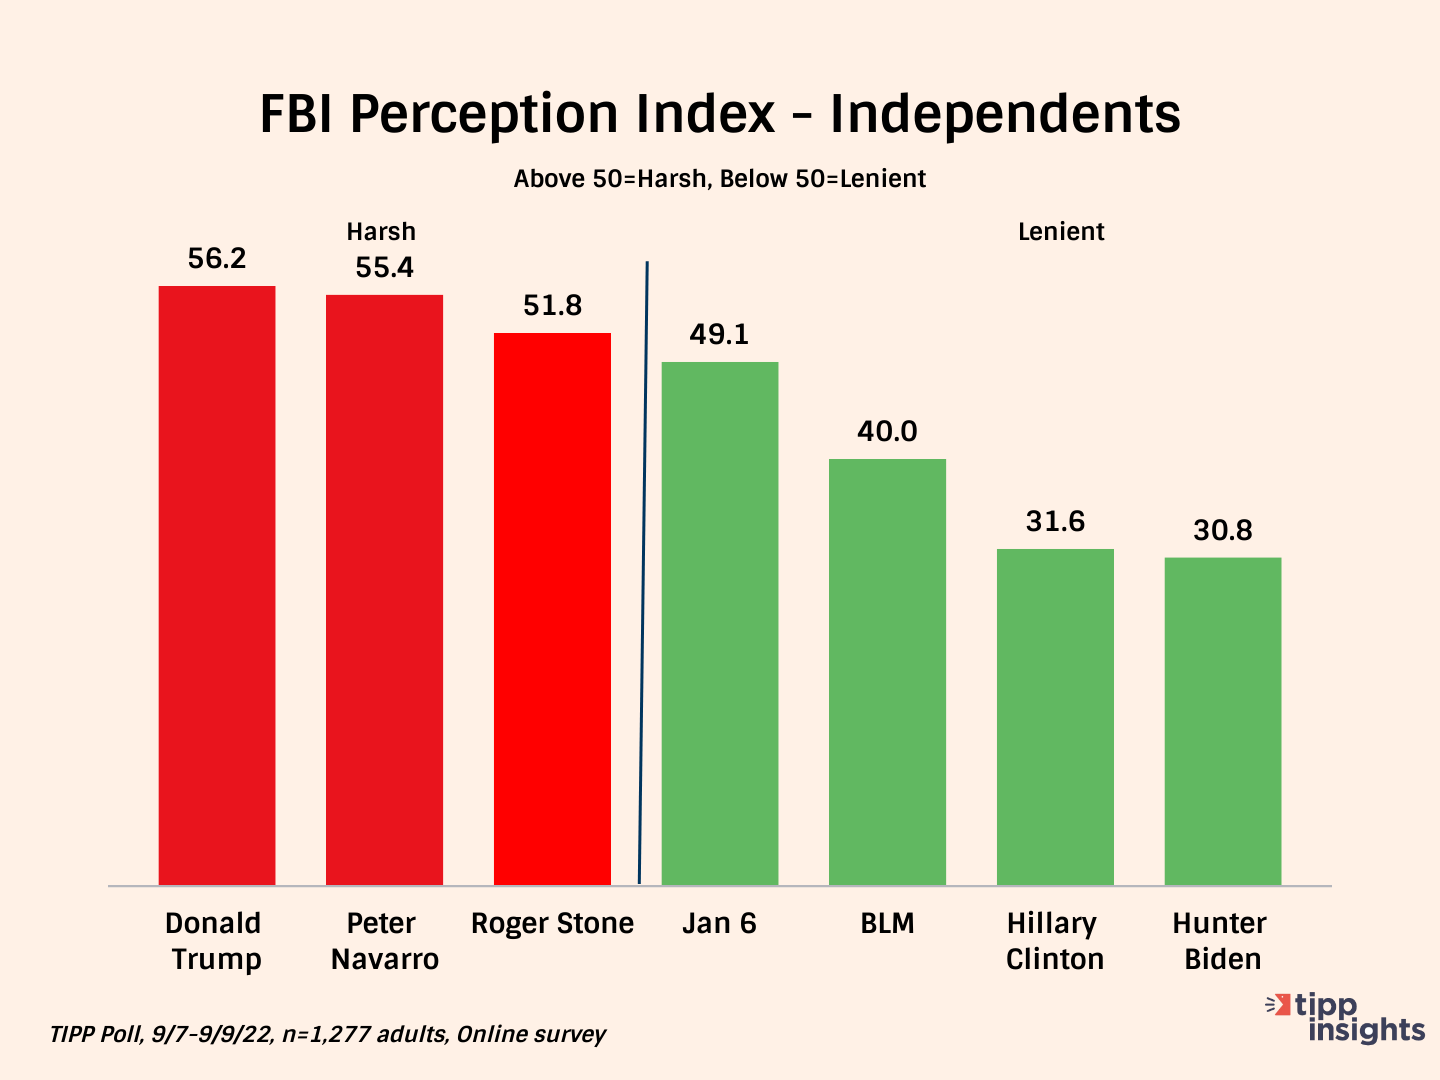 TIPP Poll Results 9/7-9/9/22: Chart showing Independents perception on the FBI's handling of Donald Trump, Peter Navarro, Roger Stone, January 6th, Black Lives Matter, Hillary Clinton, and Hunter Biden laptop. 